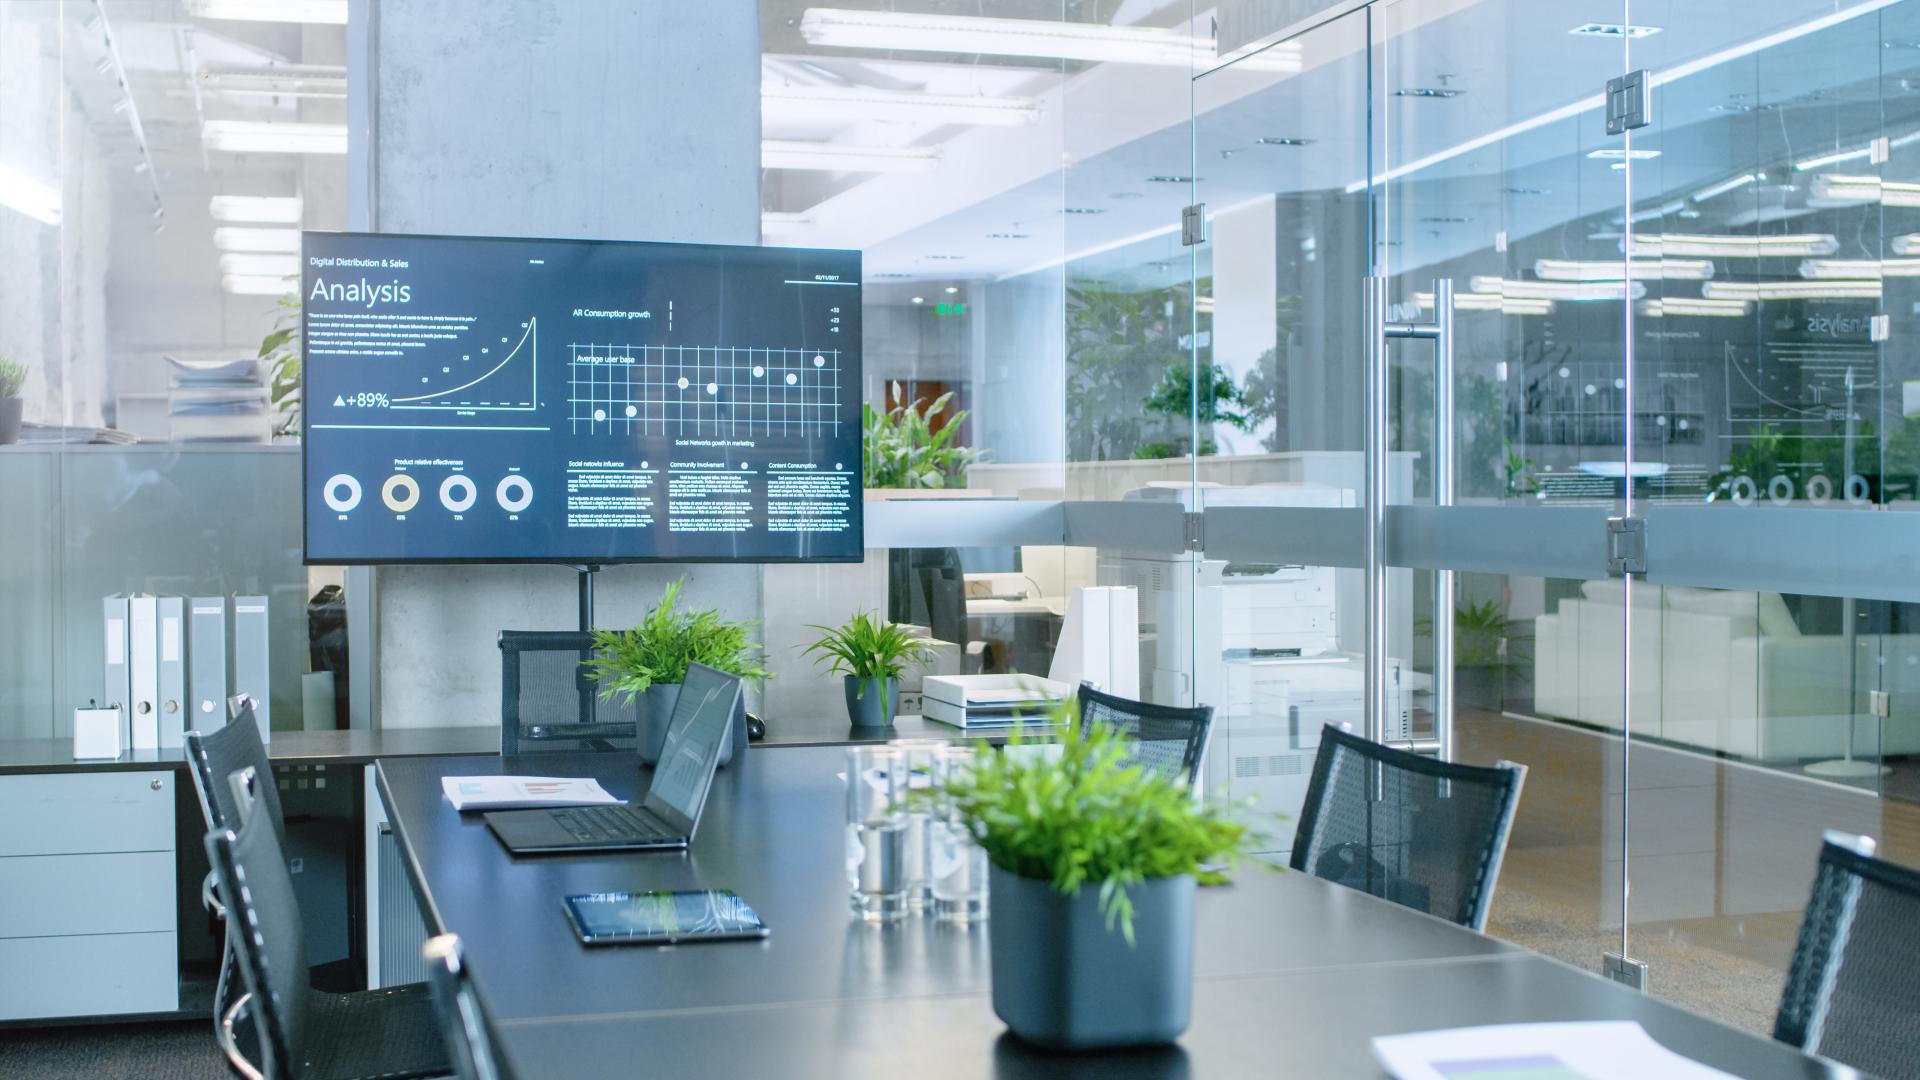 3 Ways To Use Digital Signage In The Workplace